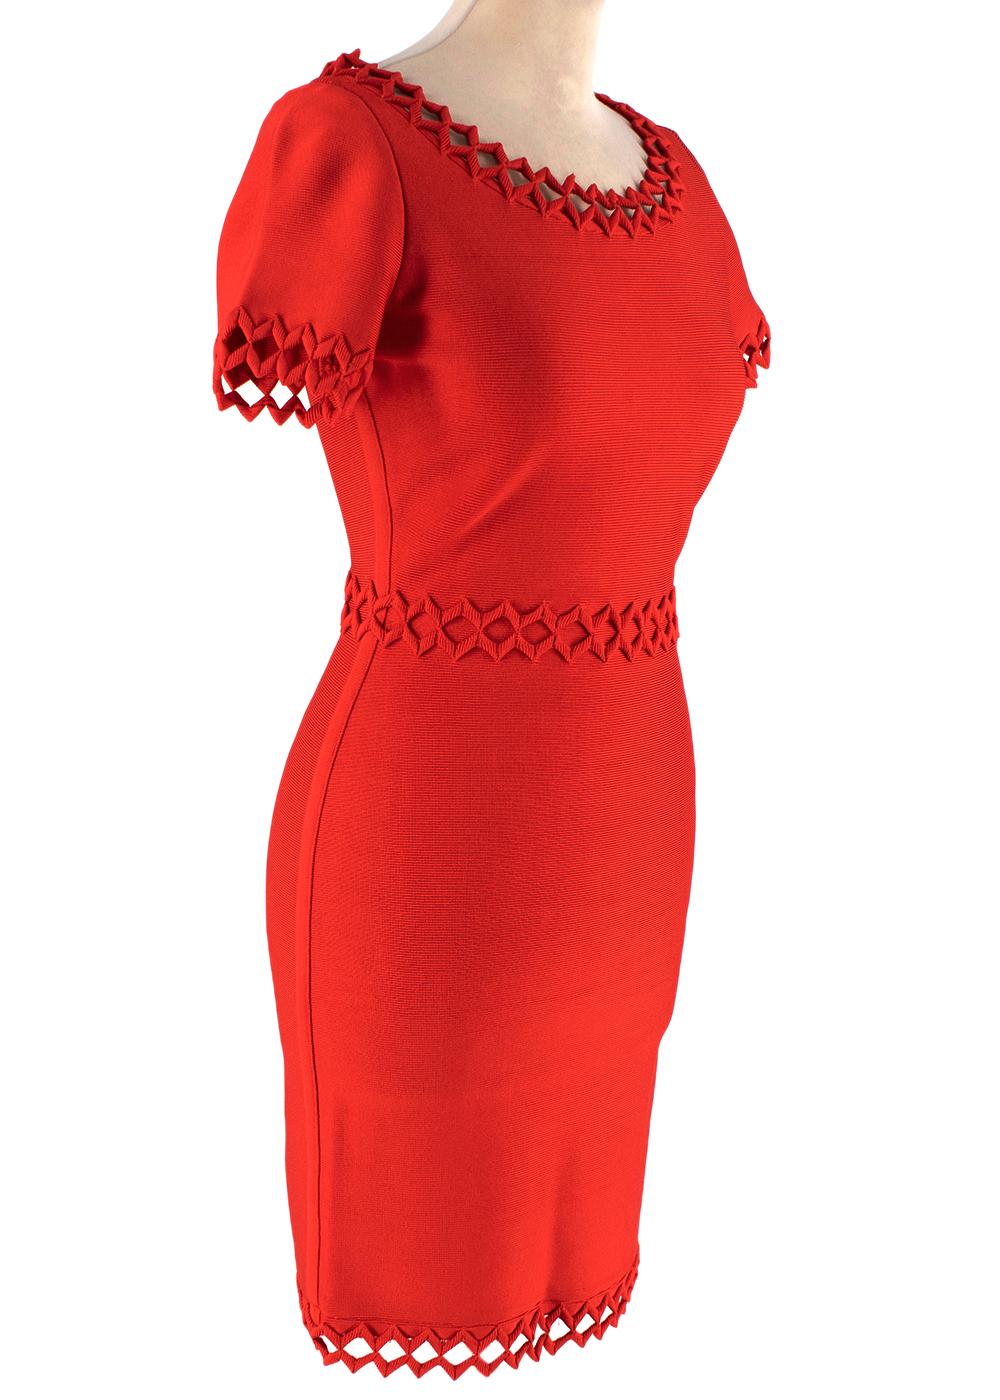 Herve Leger Red Zig-Zag Trim Short Sleeve Bandage Dress

- Pillar-box red hue
- Signature bandage material, creating a form-fitting, supportive silhouette
- Cap sleeve, knee-length
- Zig-zag trim to the bateau neckline, waist, sleeve and